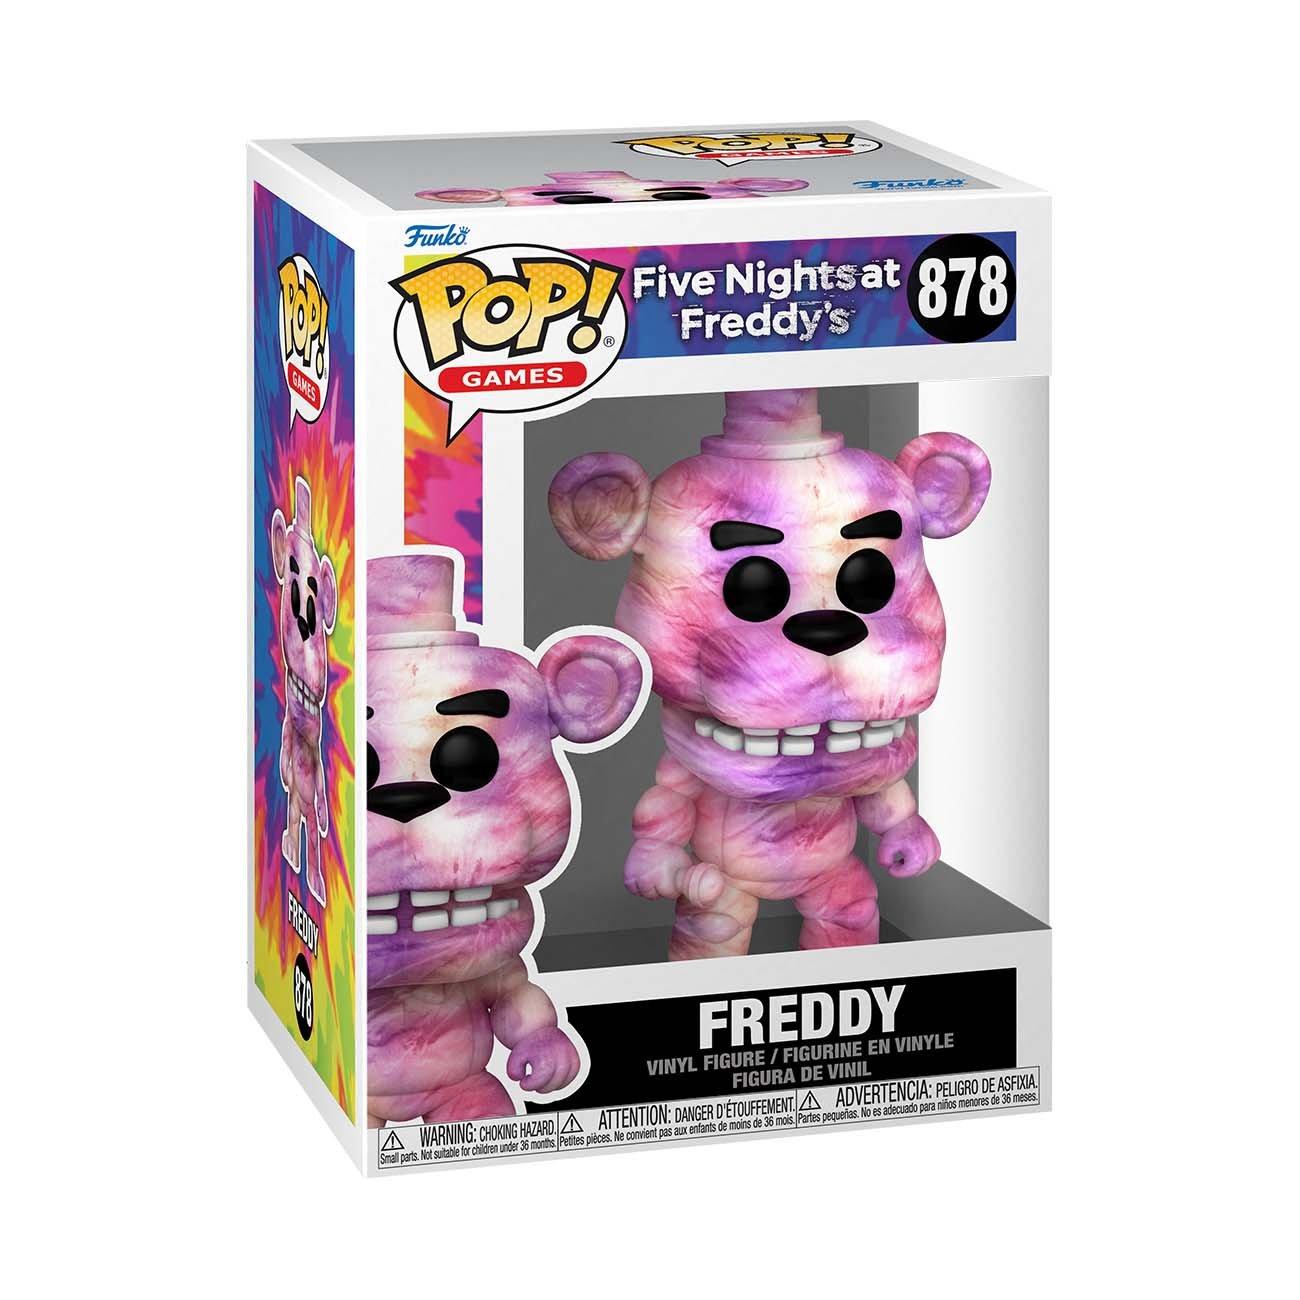 NEW TIE-DYE FNAF MERCH REVEALED!!! - Funko Five Nights at Freddy's Toys  Plush Action Figures Review 